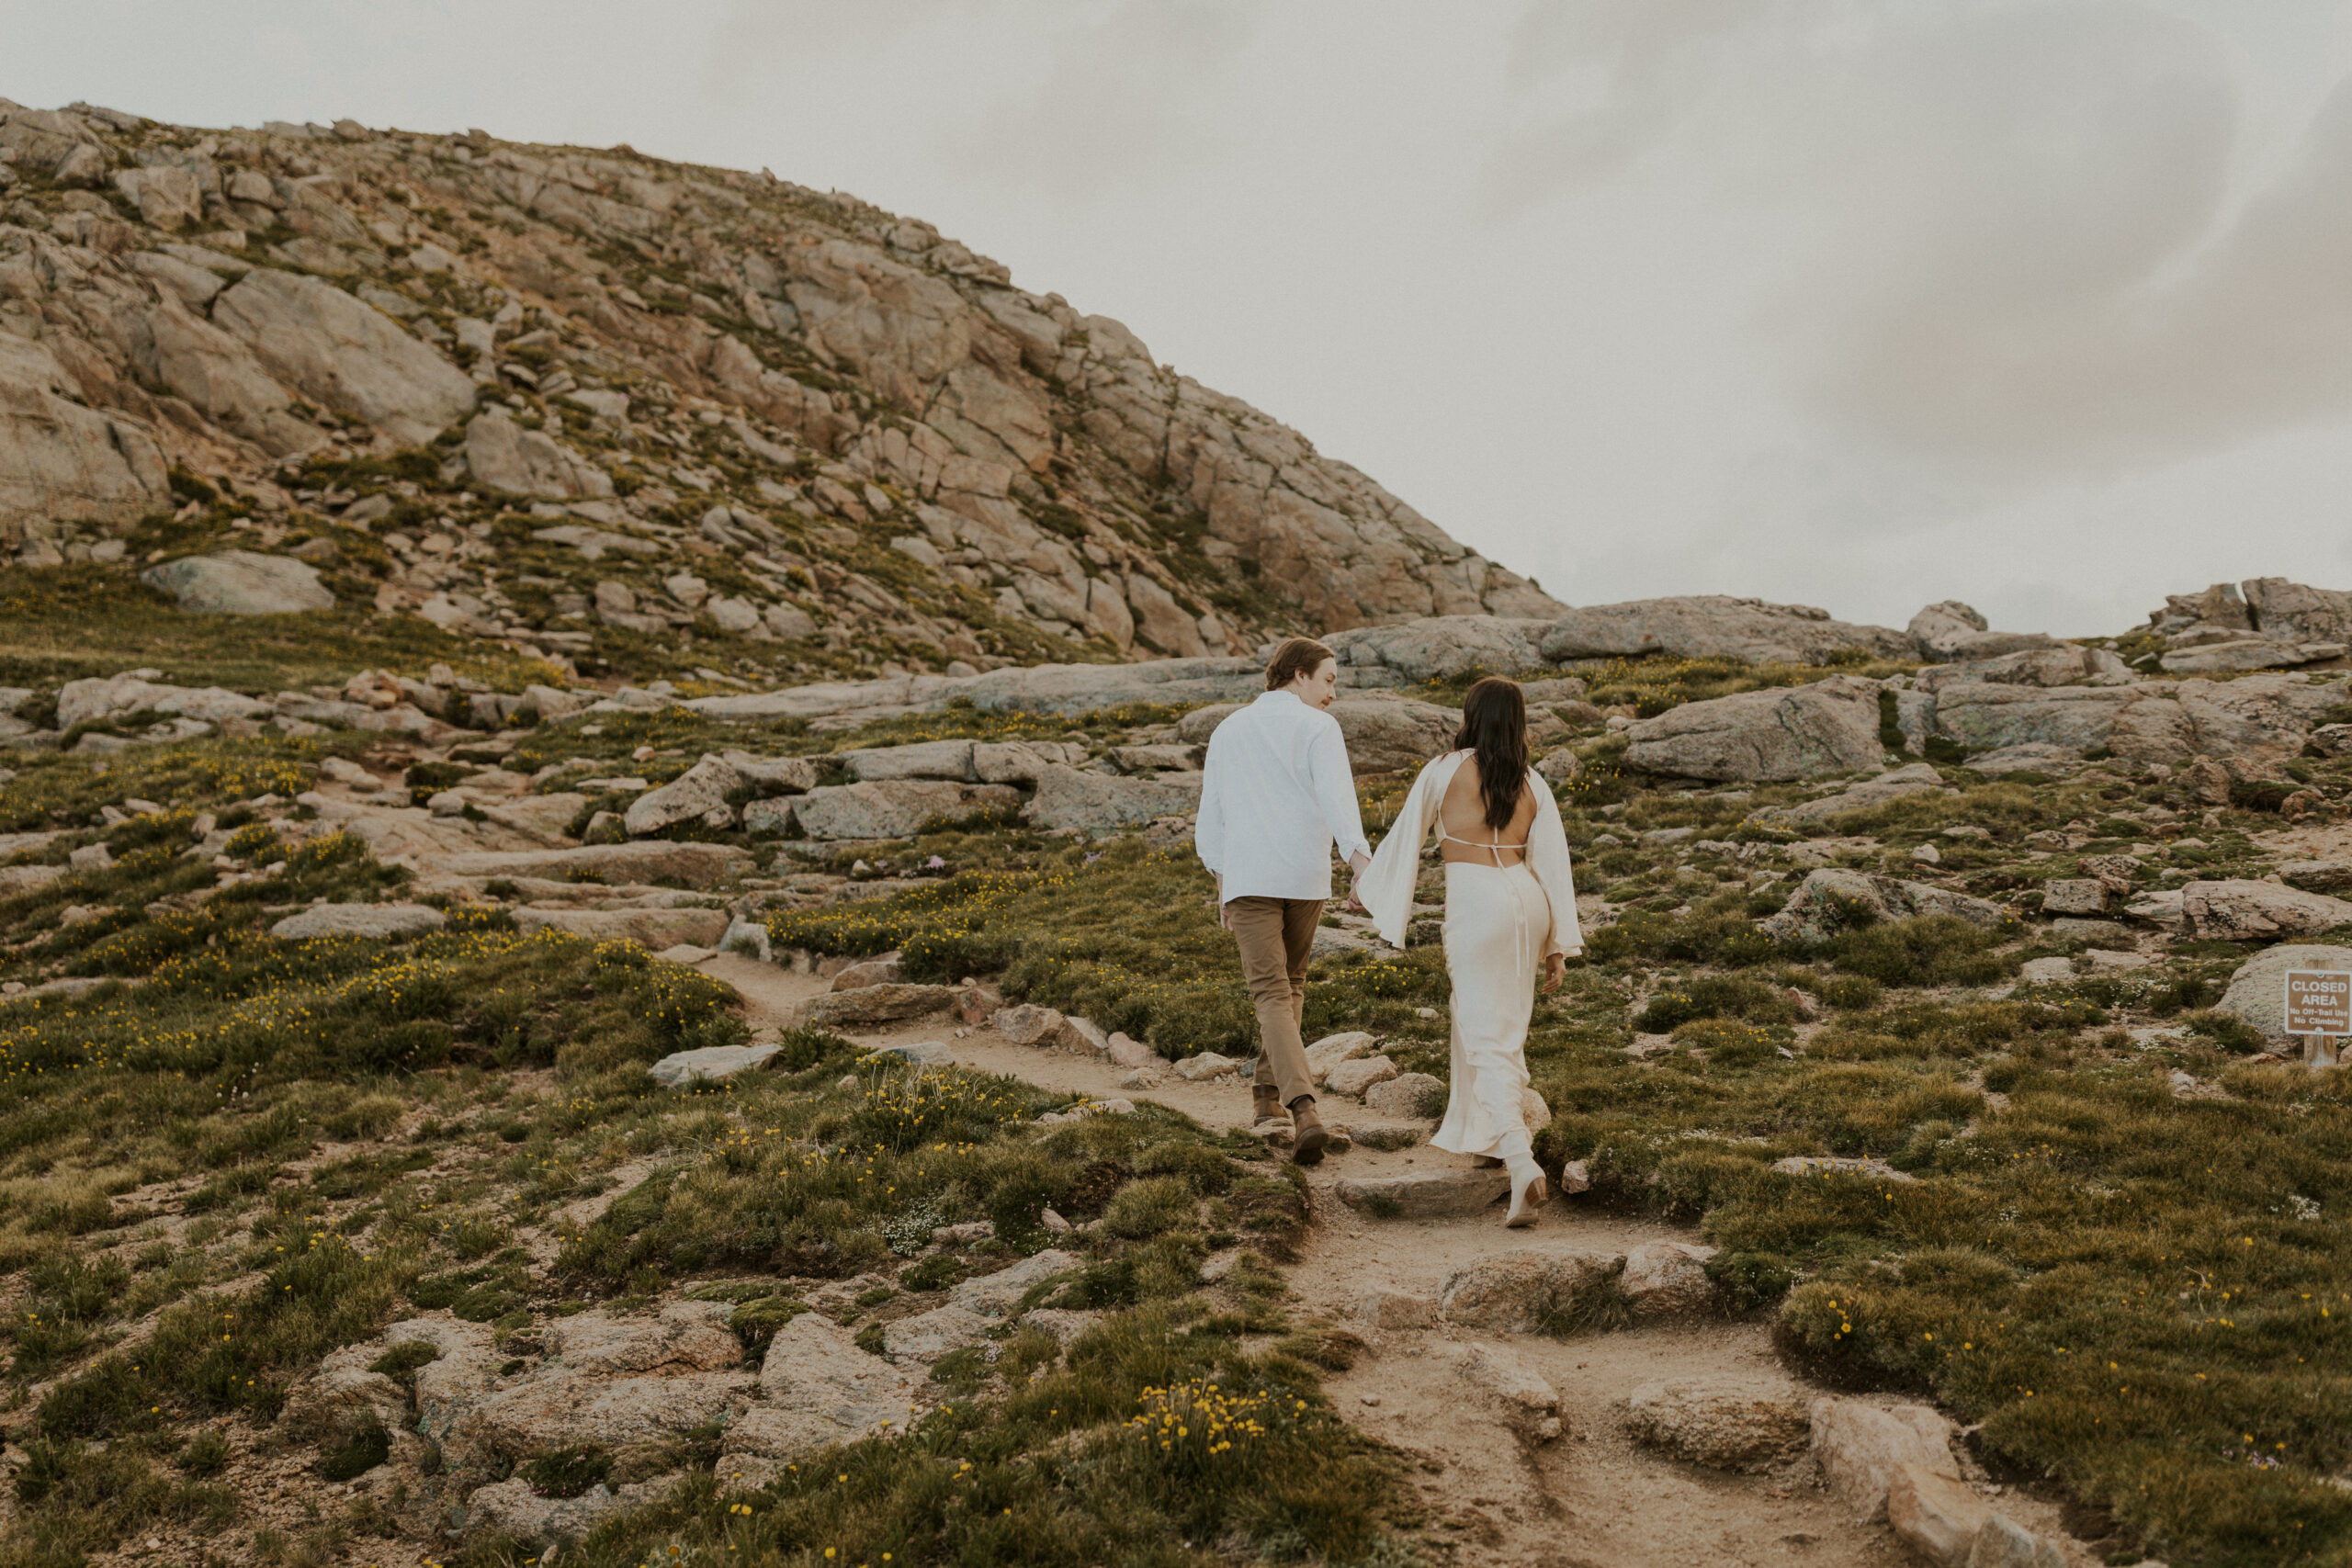 Sara + Josh's intimate summertime sunset elopement atop one of Colorado's iconic 14ers, Mount Blue Sky. It was such a beautiful, romantic evening.